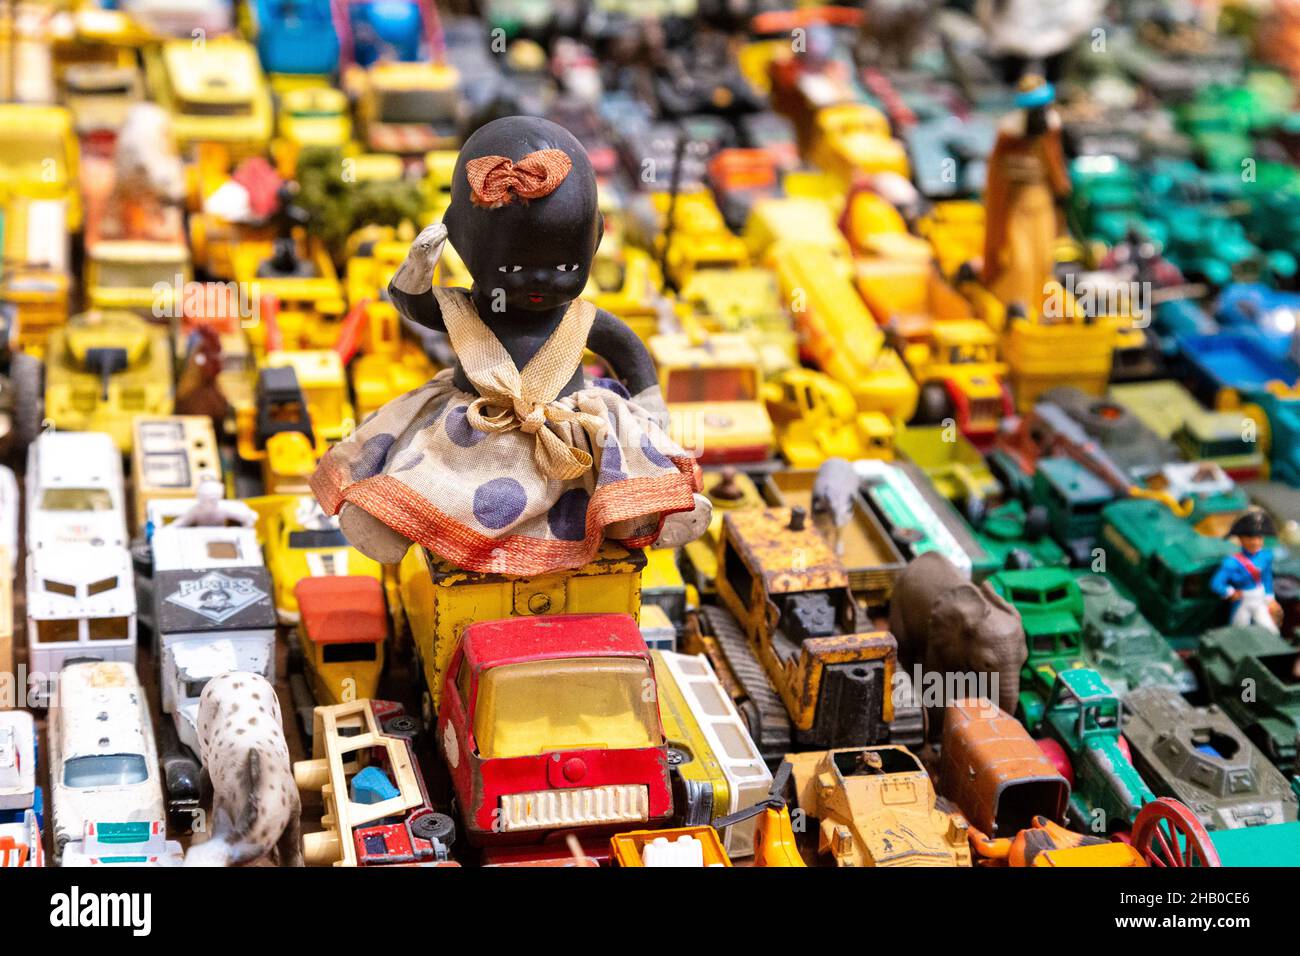 Collectible toy cars and a black doll as part of 'Exodus' by Zak Ové, RA Summer Exhibition 2021, London, UK Stock Photo